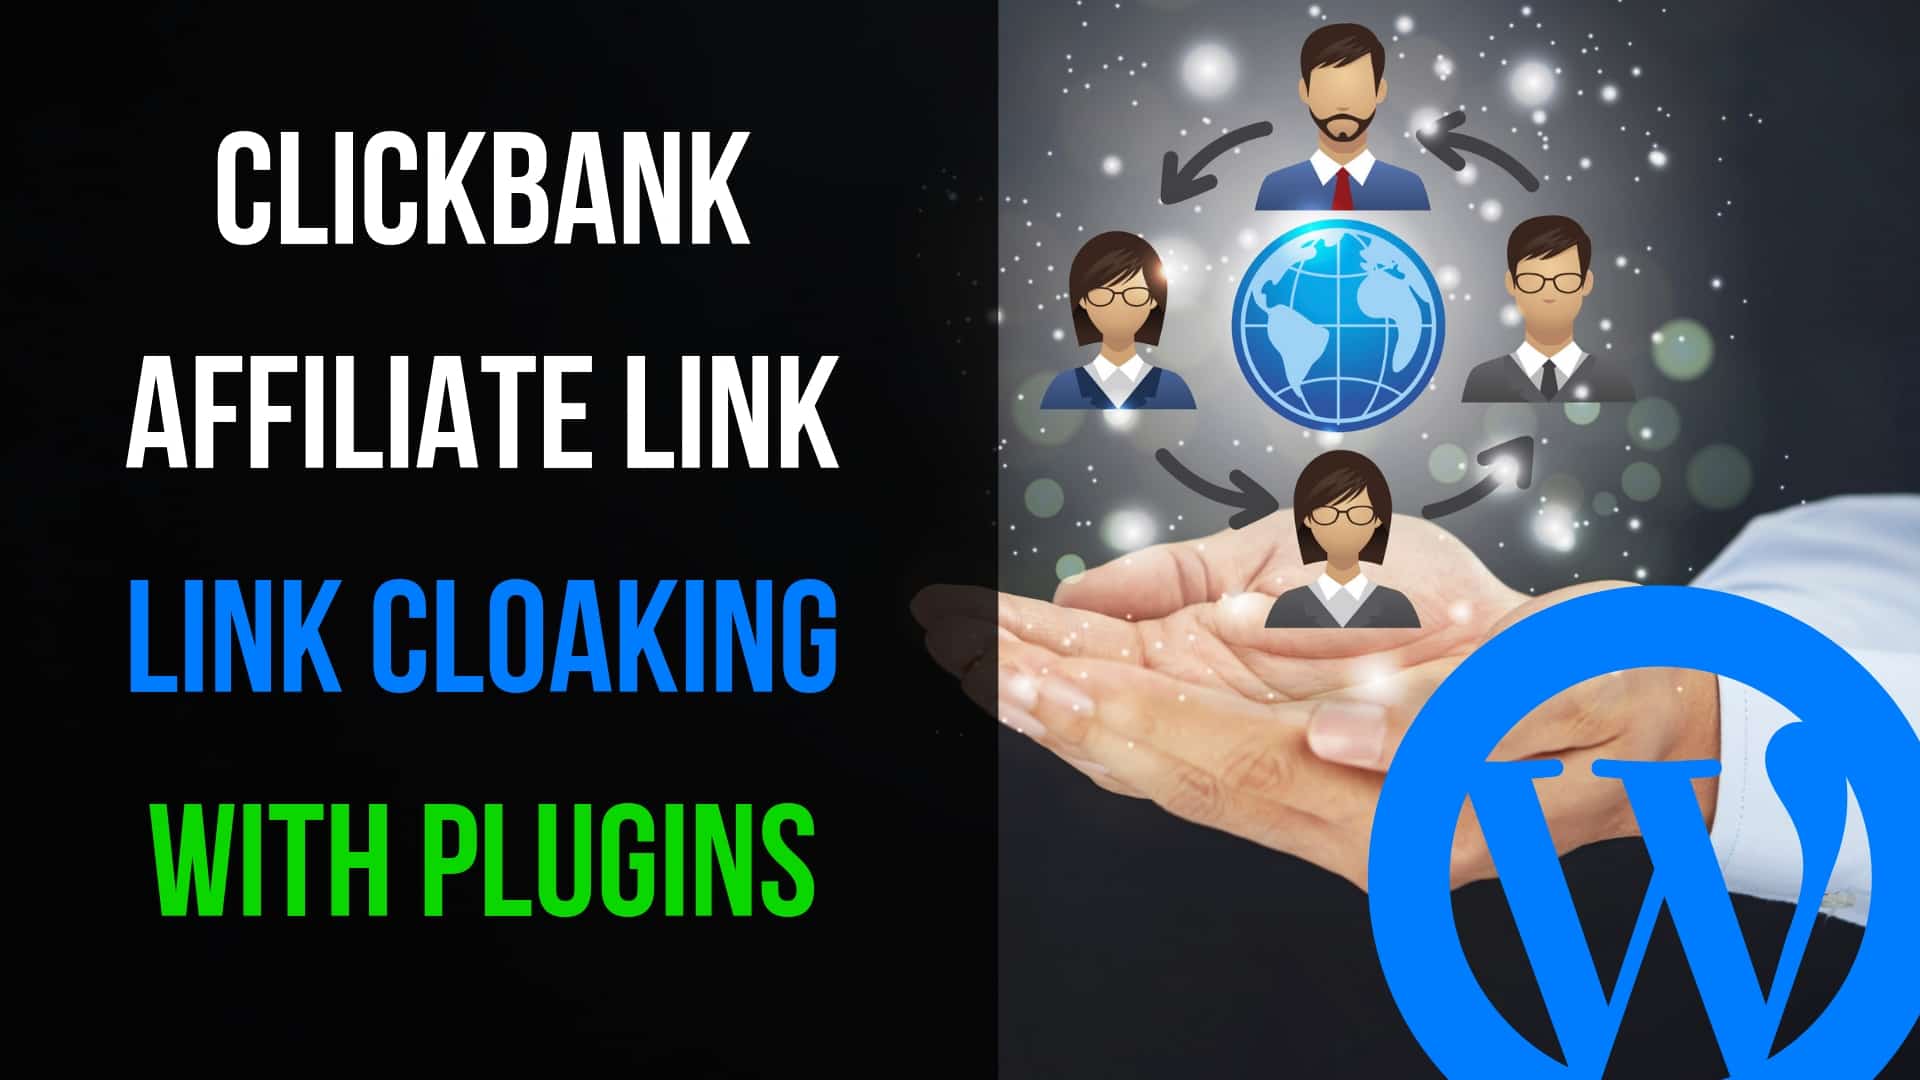 Clickbank affiliate link cloaking with plugins